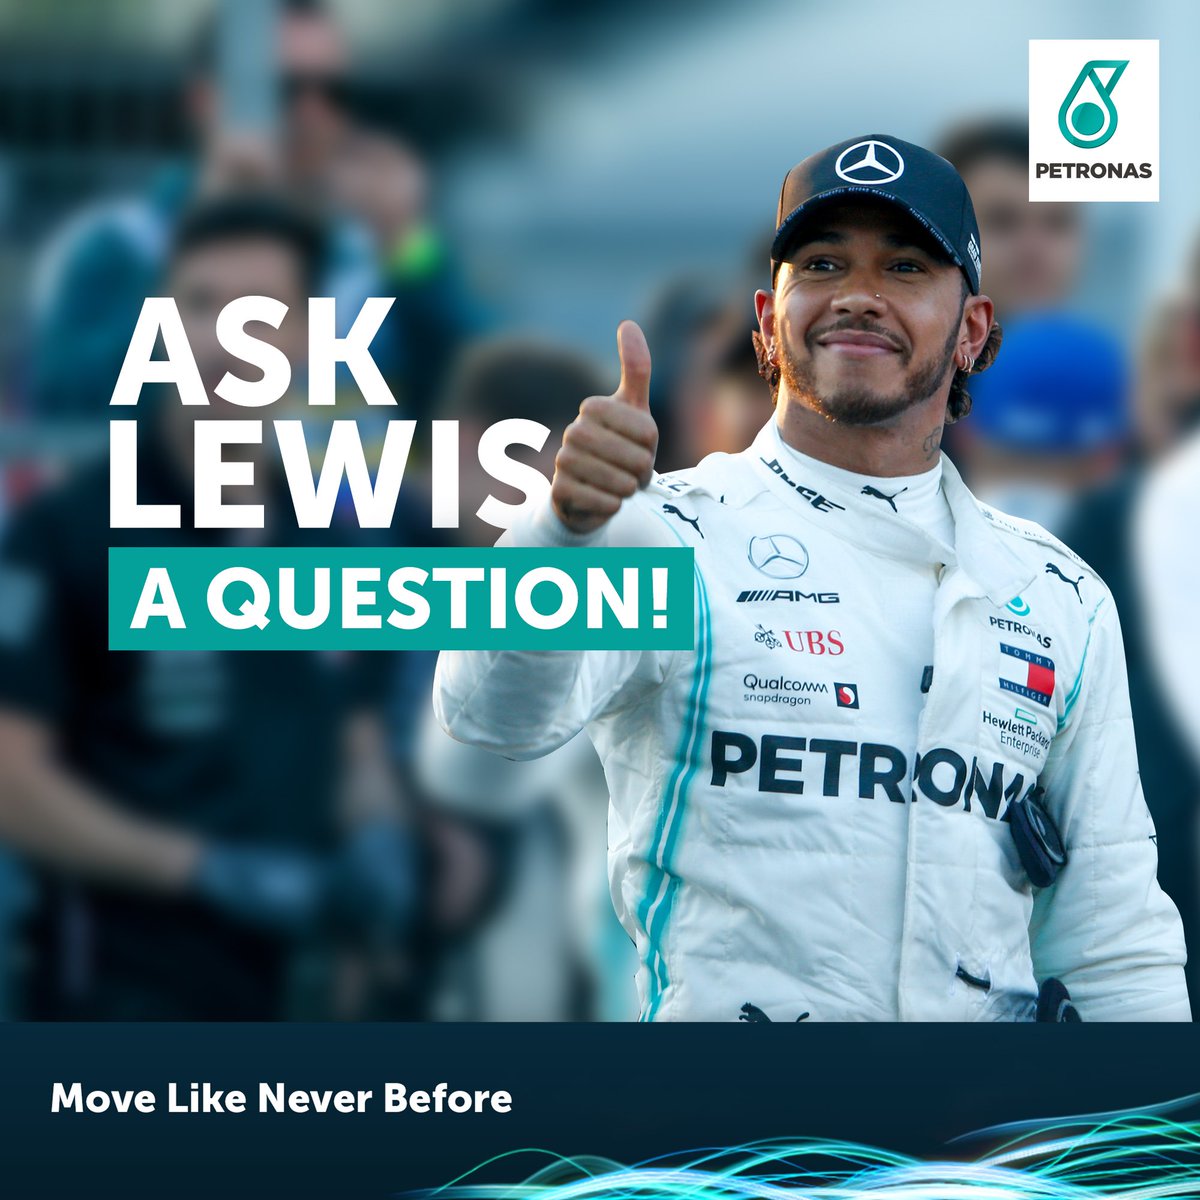 A CHANCE OF A LIFETIME! If you could just ask Lewis Hamilton a question, what would it be? 🤔👀

Don't forget to add #AskLewis #PDBxLewis! 

#MercedesAMGF1 #PETRONASMotorsport #PETRONASPrimax #PETRONASSyntium #theWinningFormula #F1